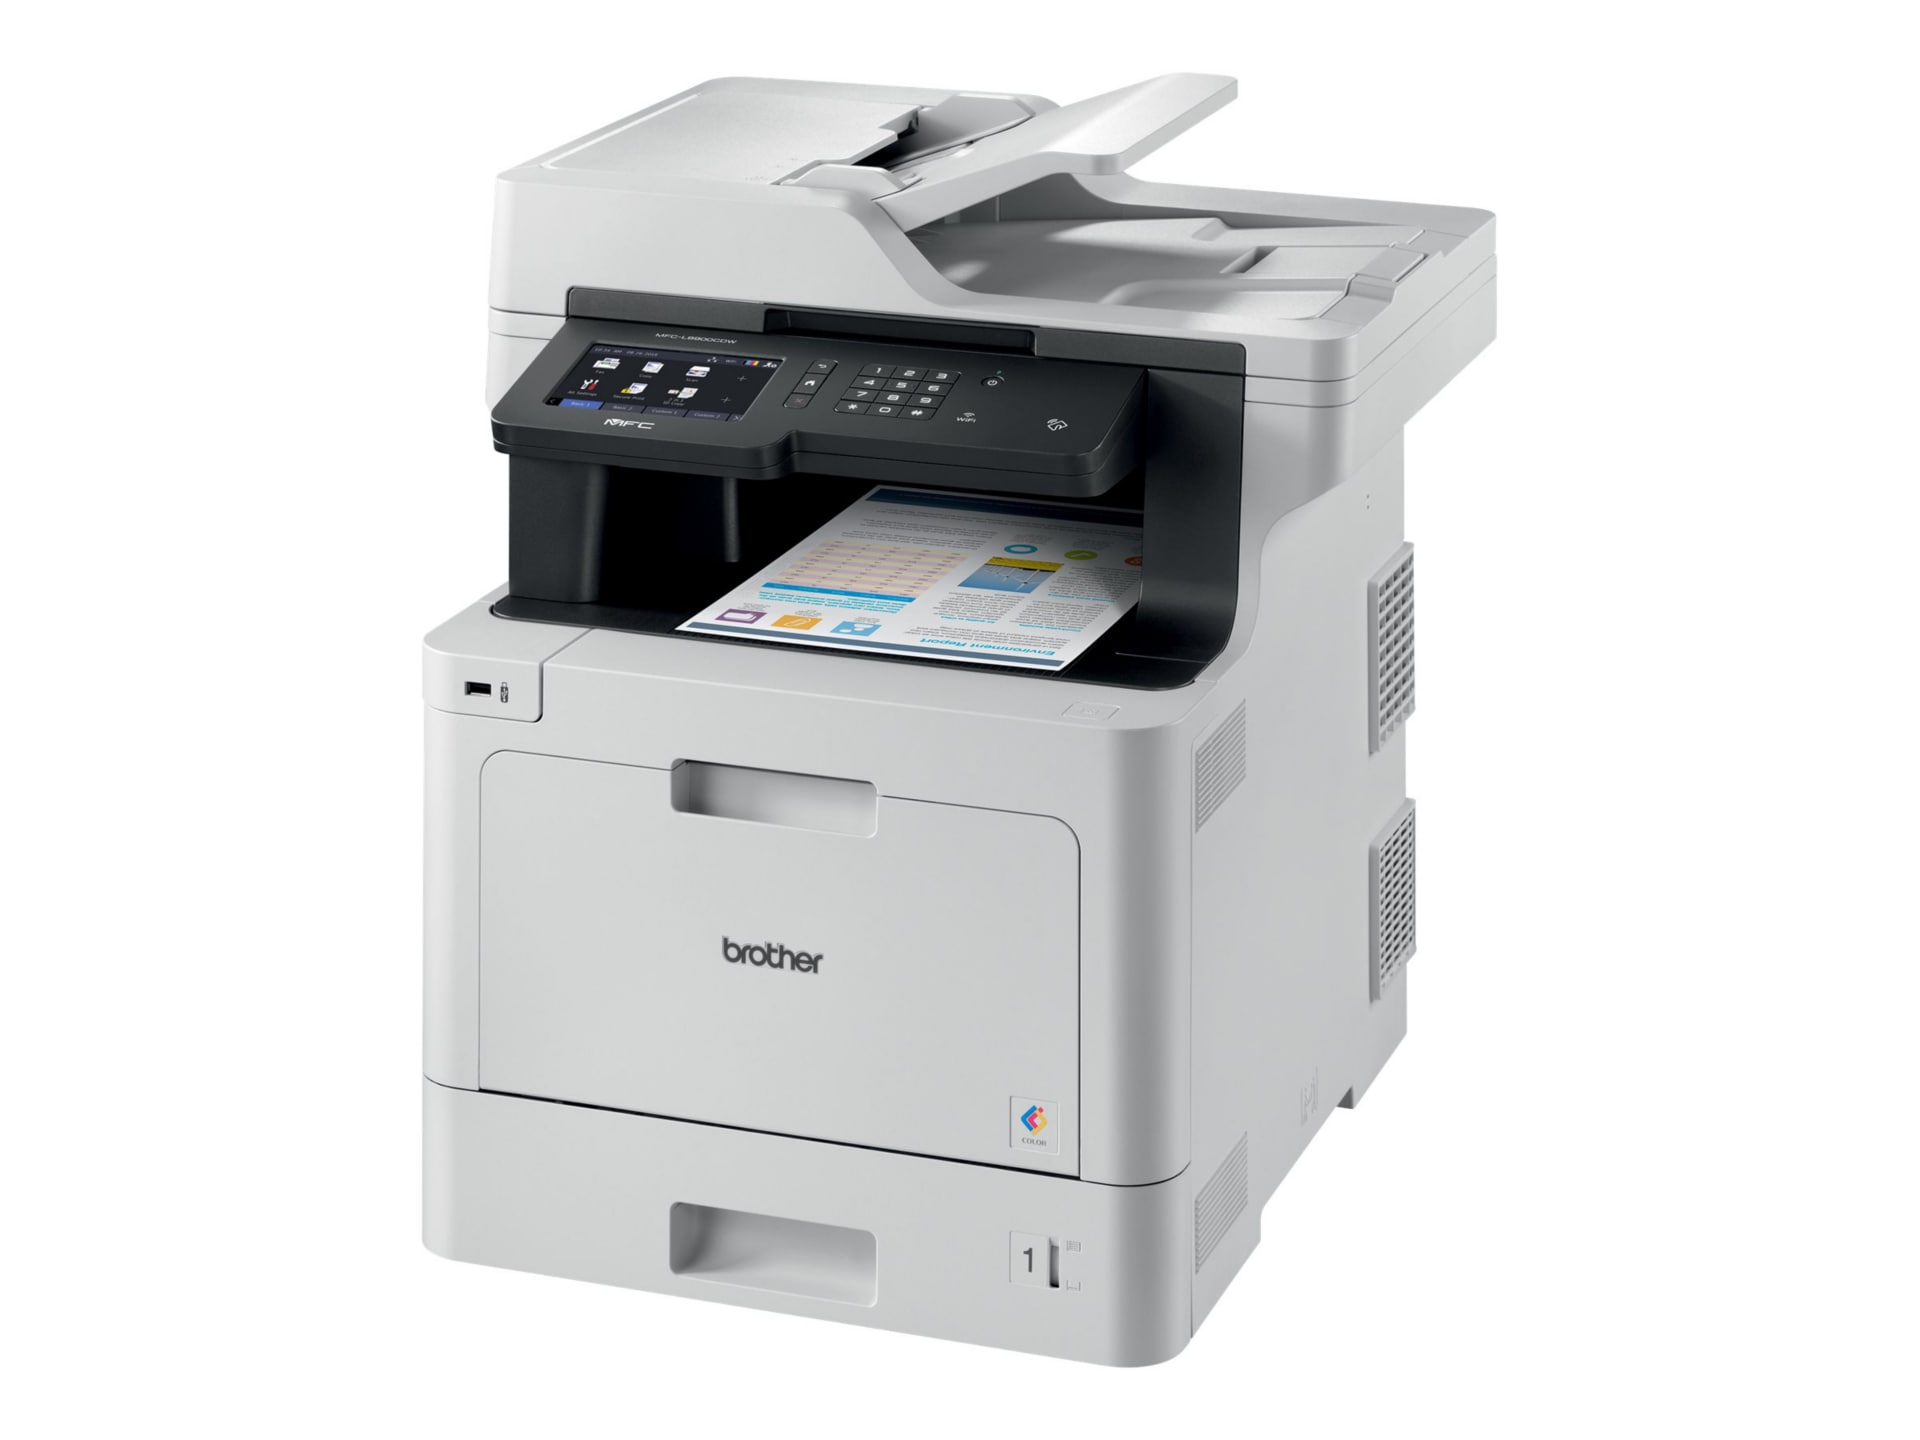 Brother MFC-L8900CDW - multifunction printer - color - MFCL8900CDW